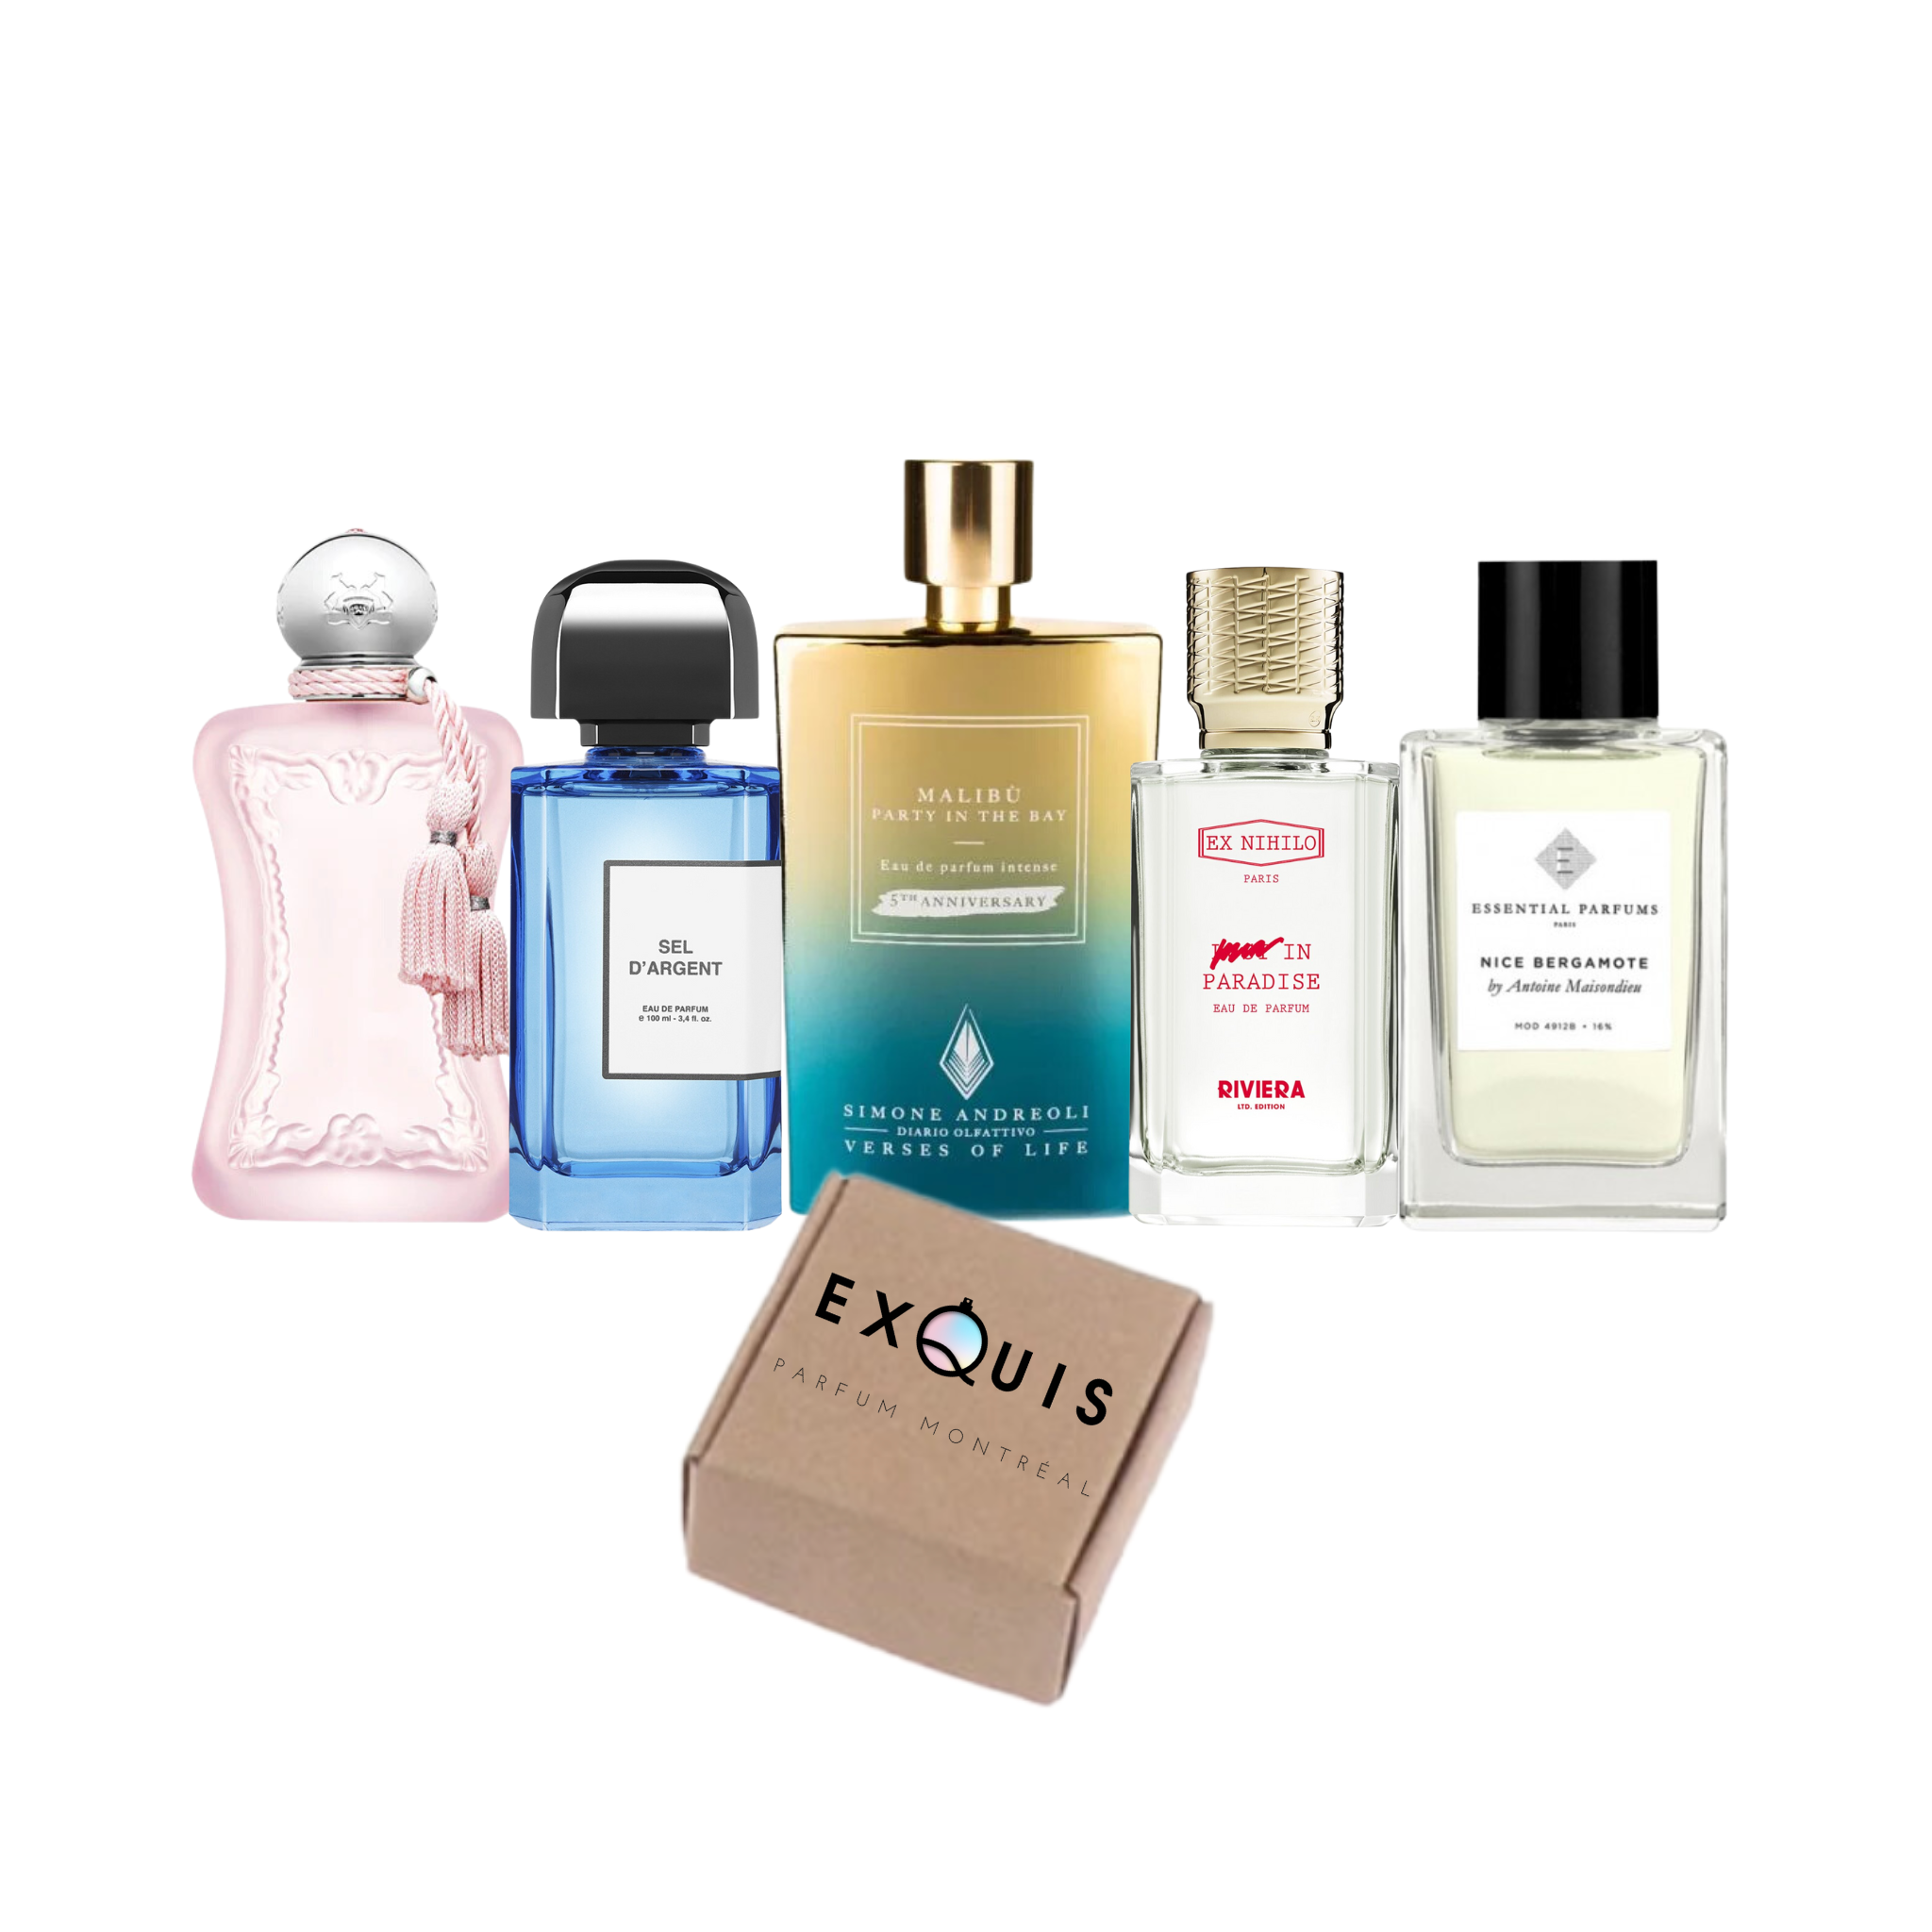 Summer Discovery fragrance set